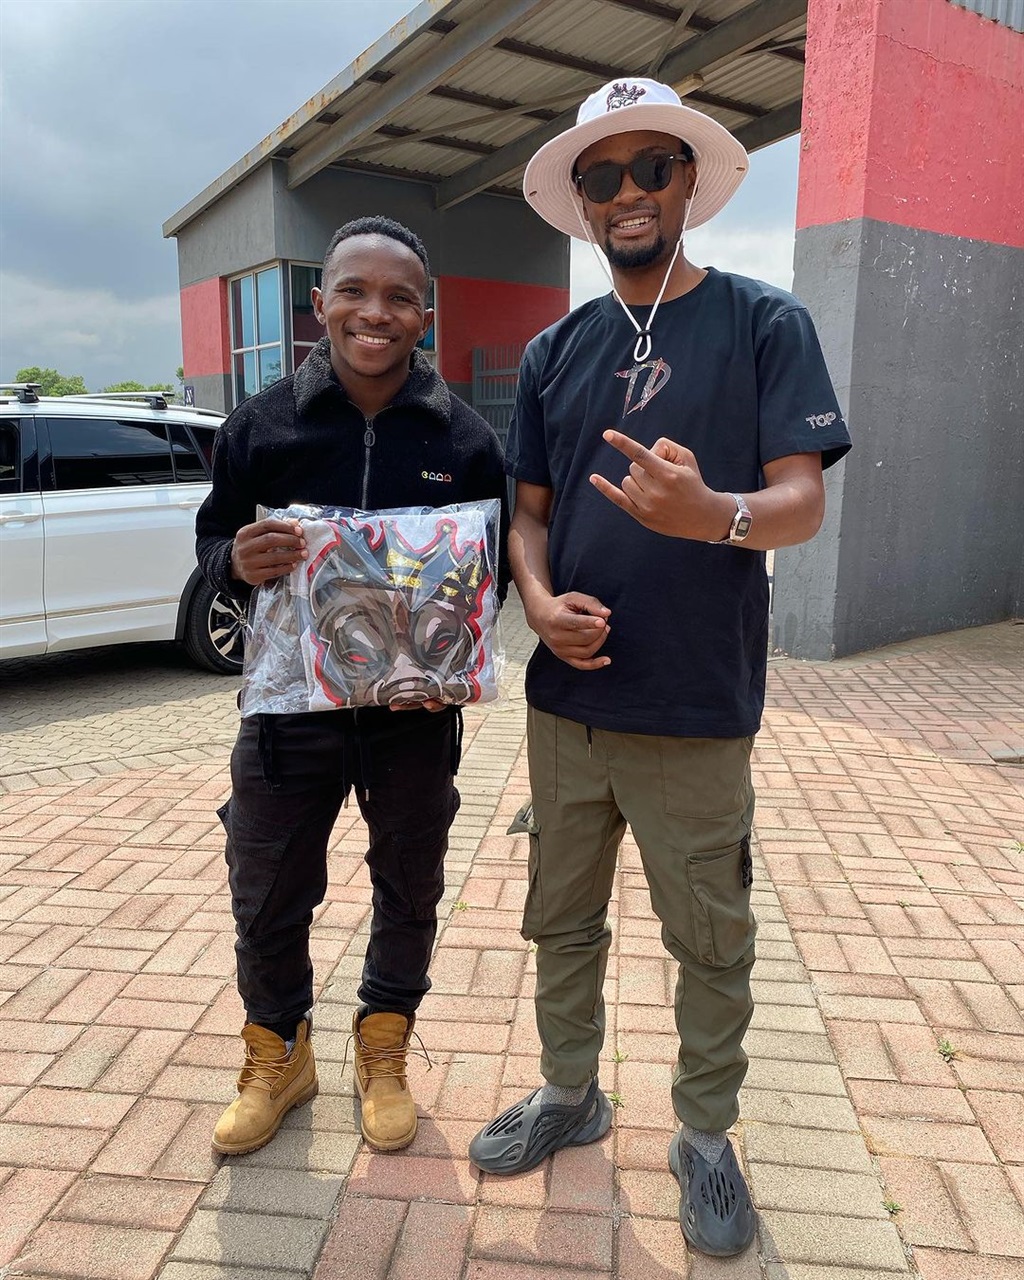 Orlando Pirates playmaker Phillip Ndlondlo has received some merchandise from the famous Amapiano music platfrom Top Dawg Sessions.